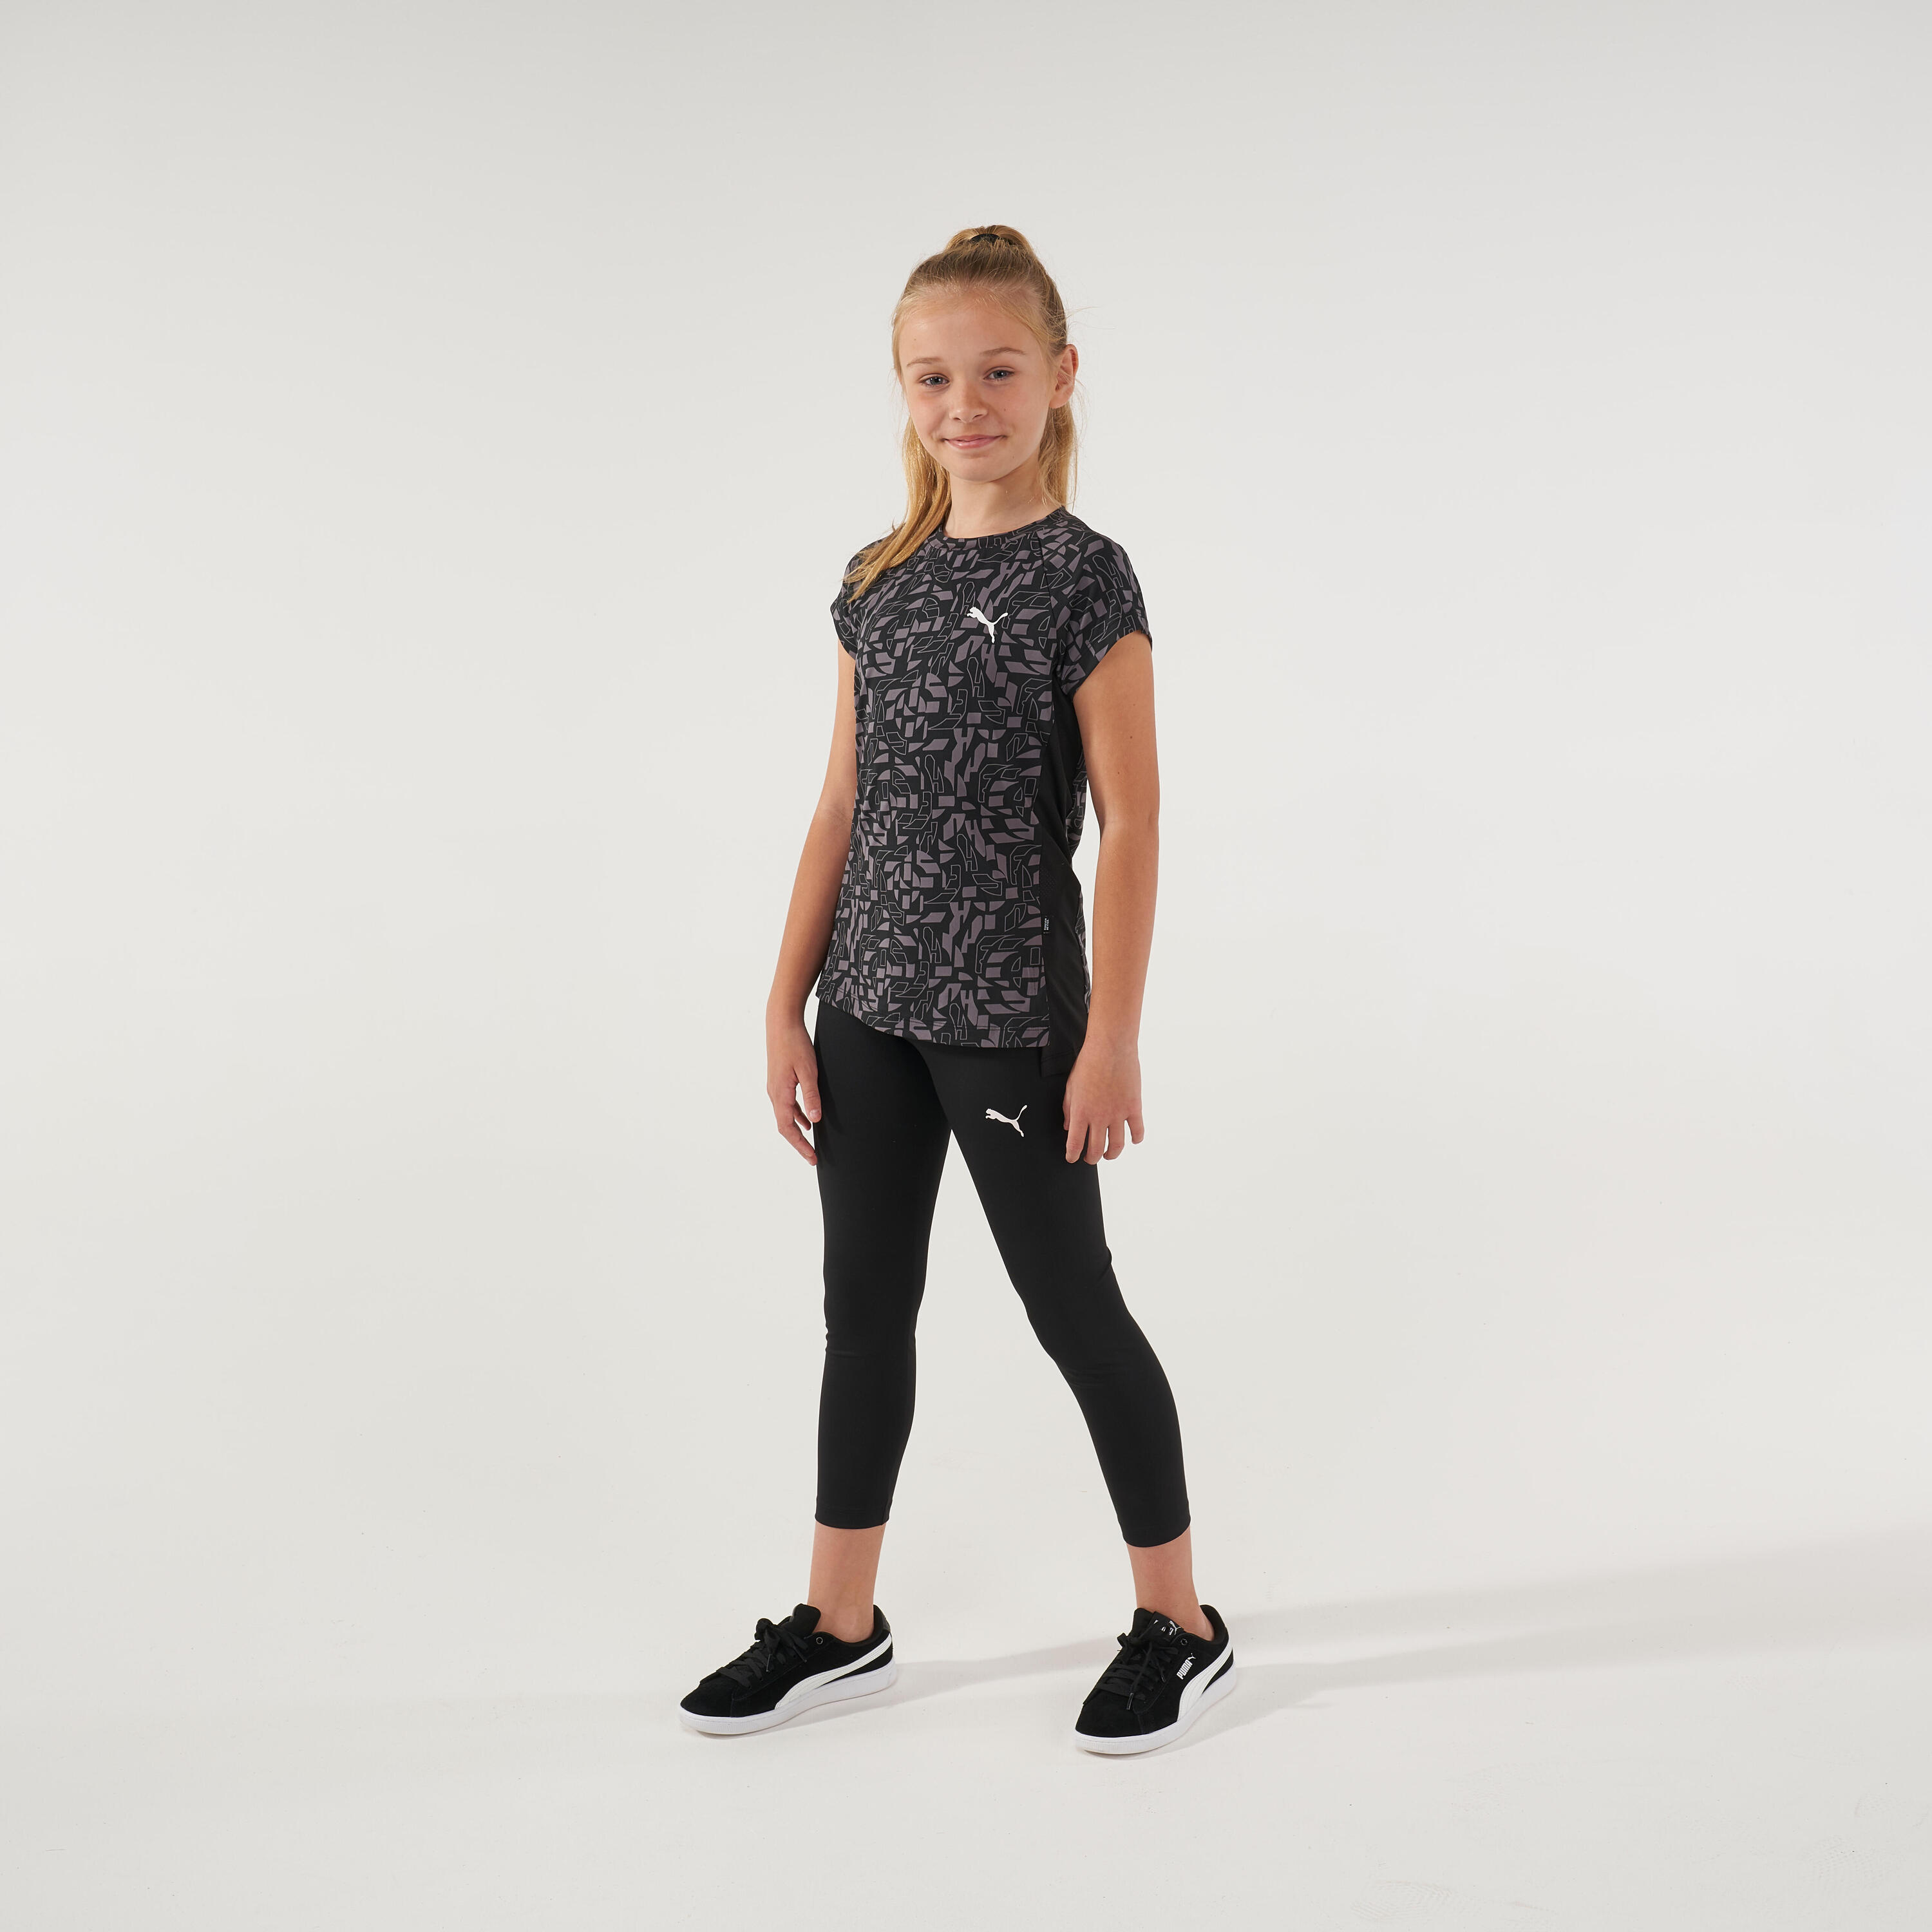 Refurbished Kids Breathable Synthetic Puma T-Shirt -A Grade 7/7